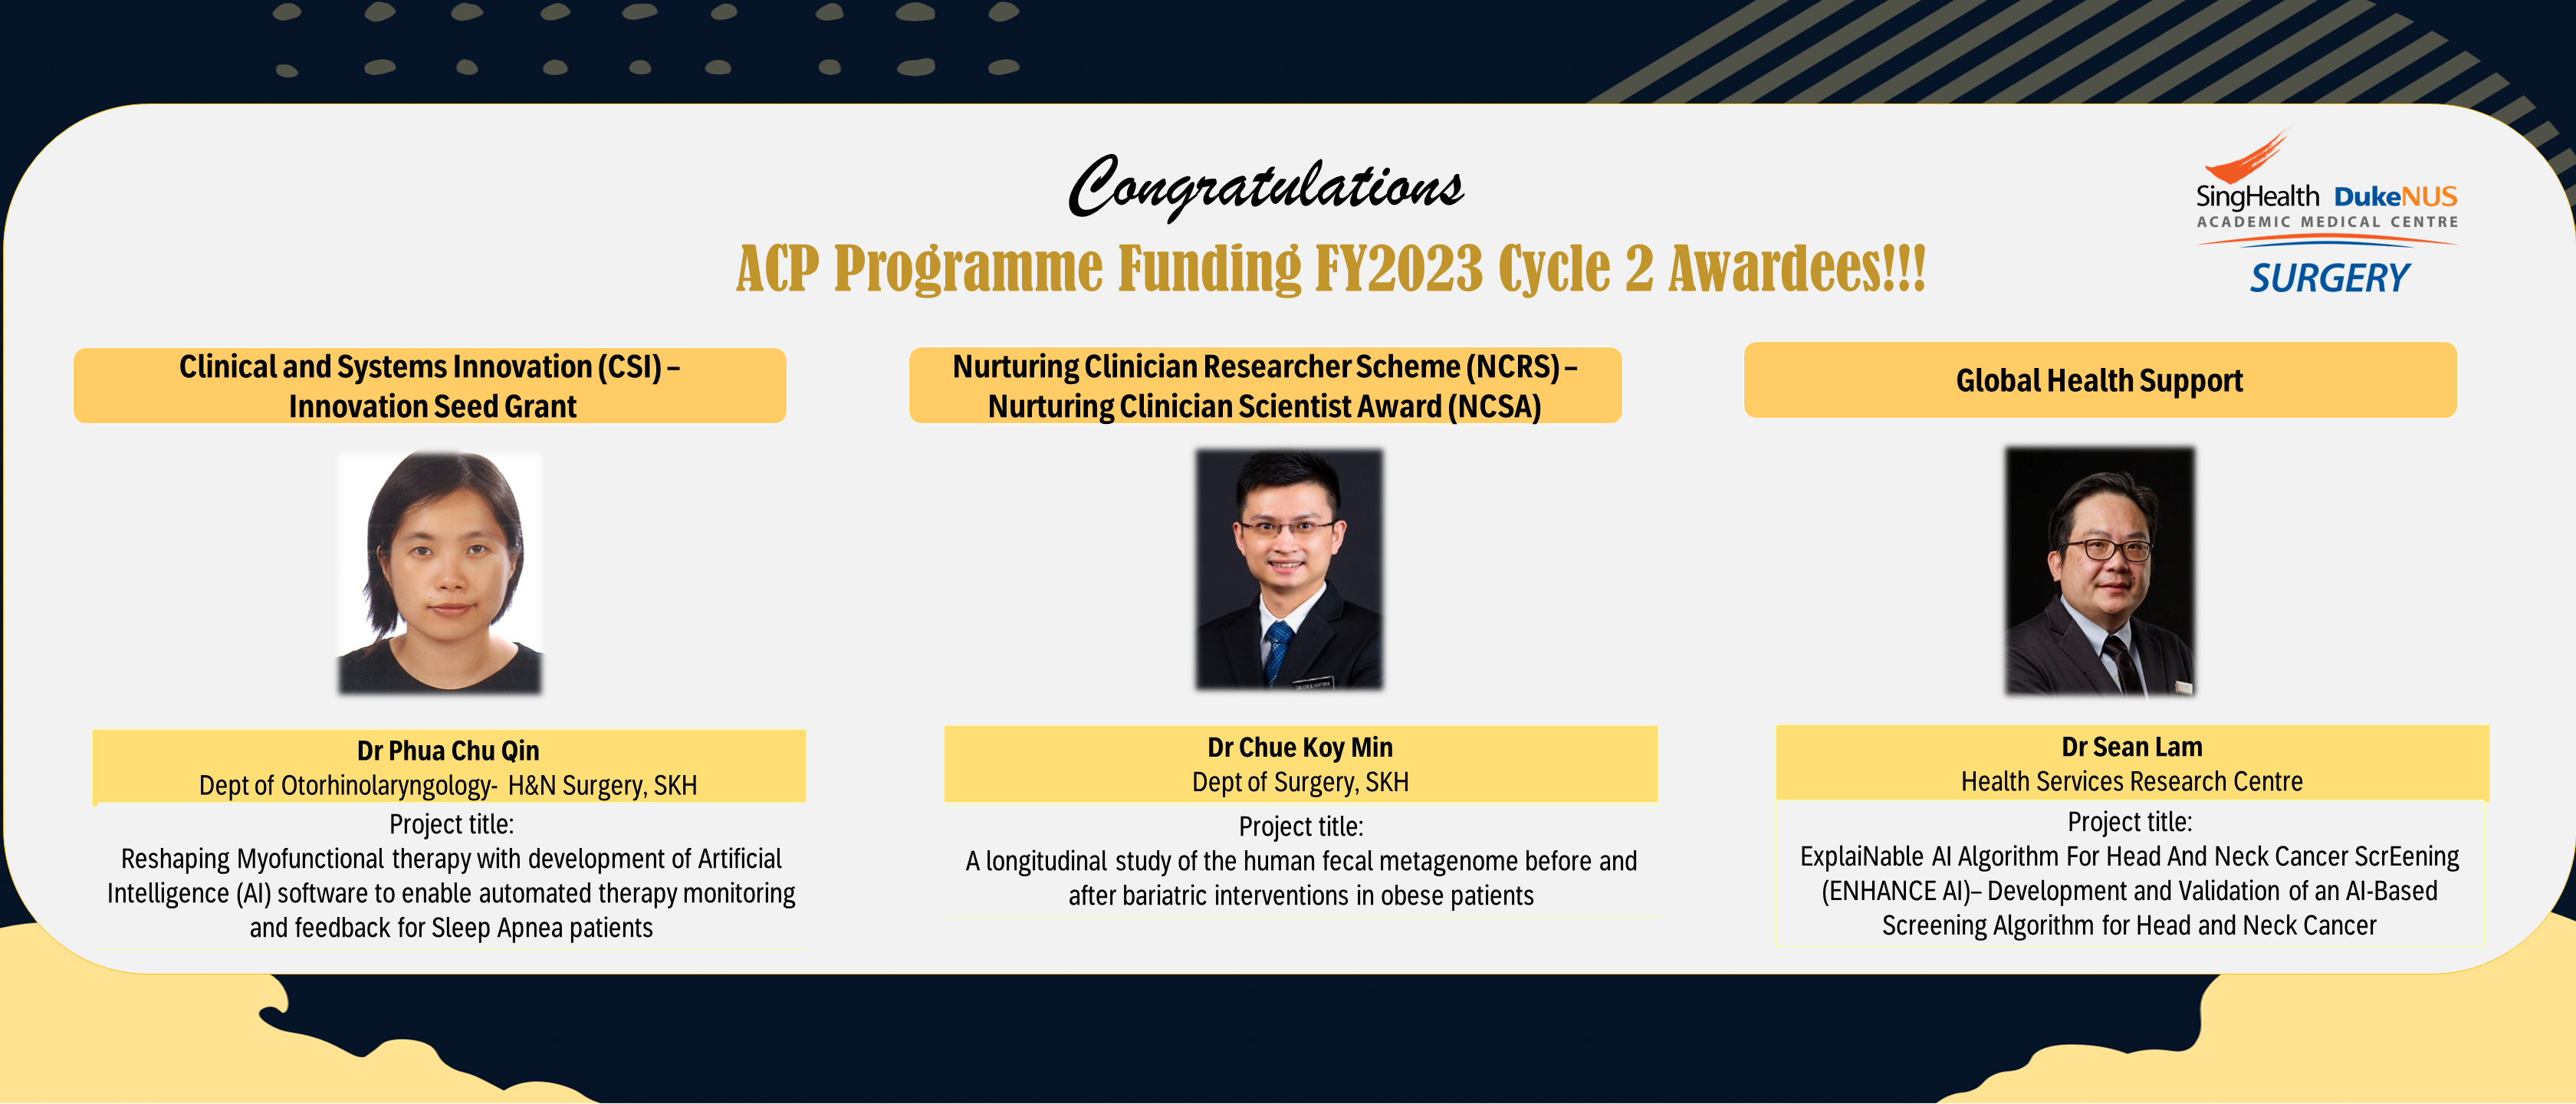 ACP Programme Funding FY 2023 Cycle 2 Awardee.png